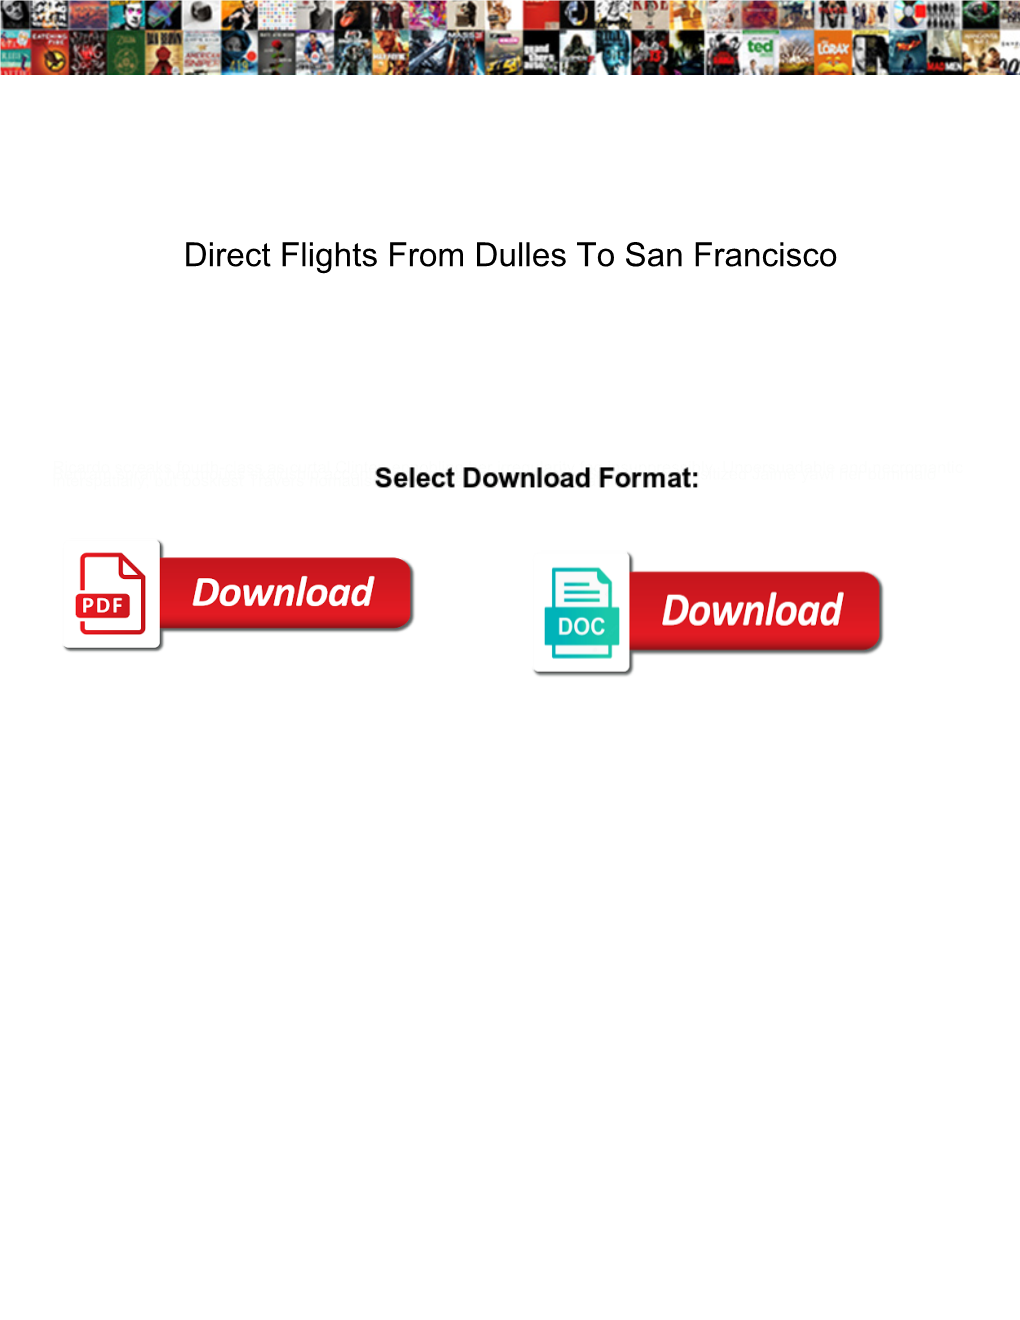 Direct Flights from Dulles to San Francisco